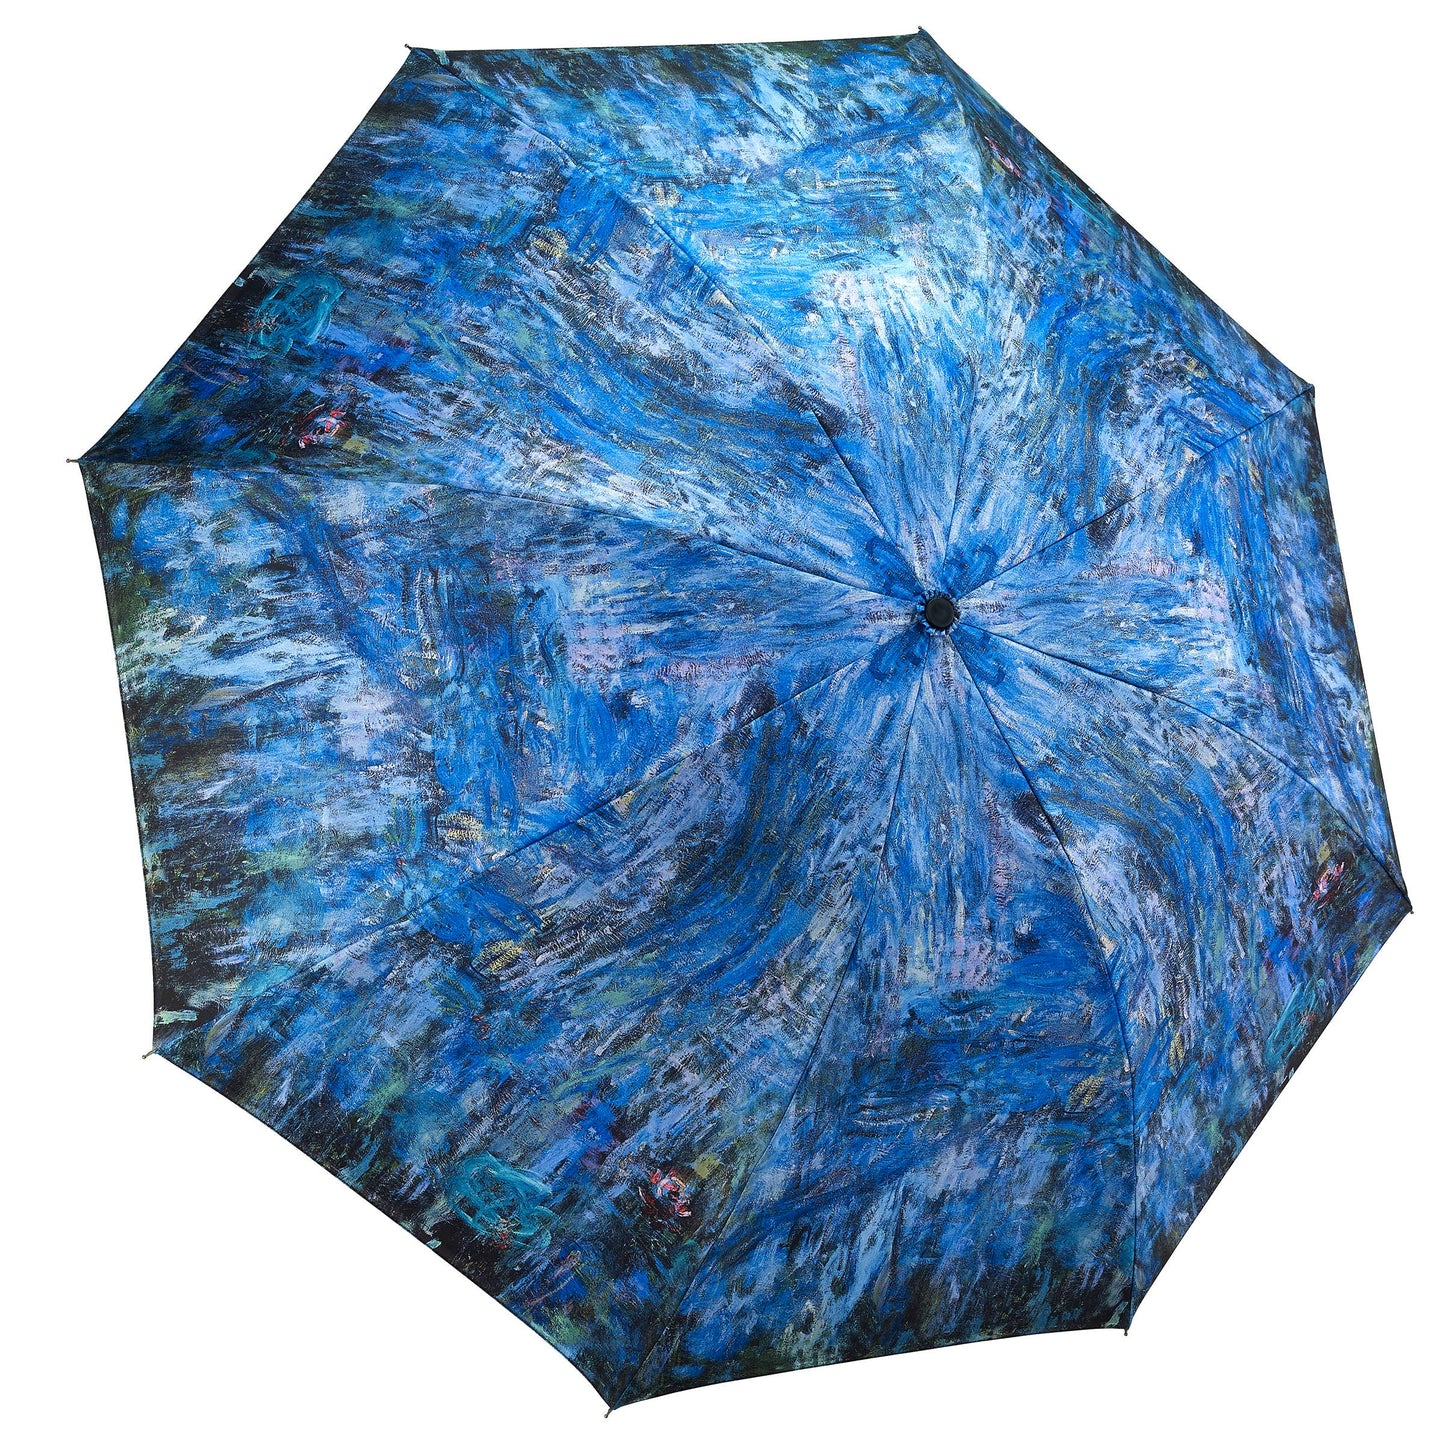 Galleria Enterprises - Waterlilies and Reflection of a Willow Tree Folding Umbrella